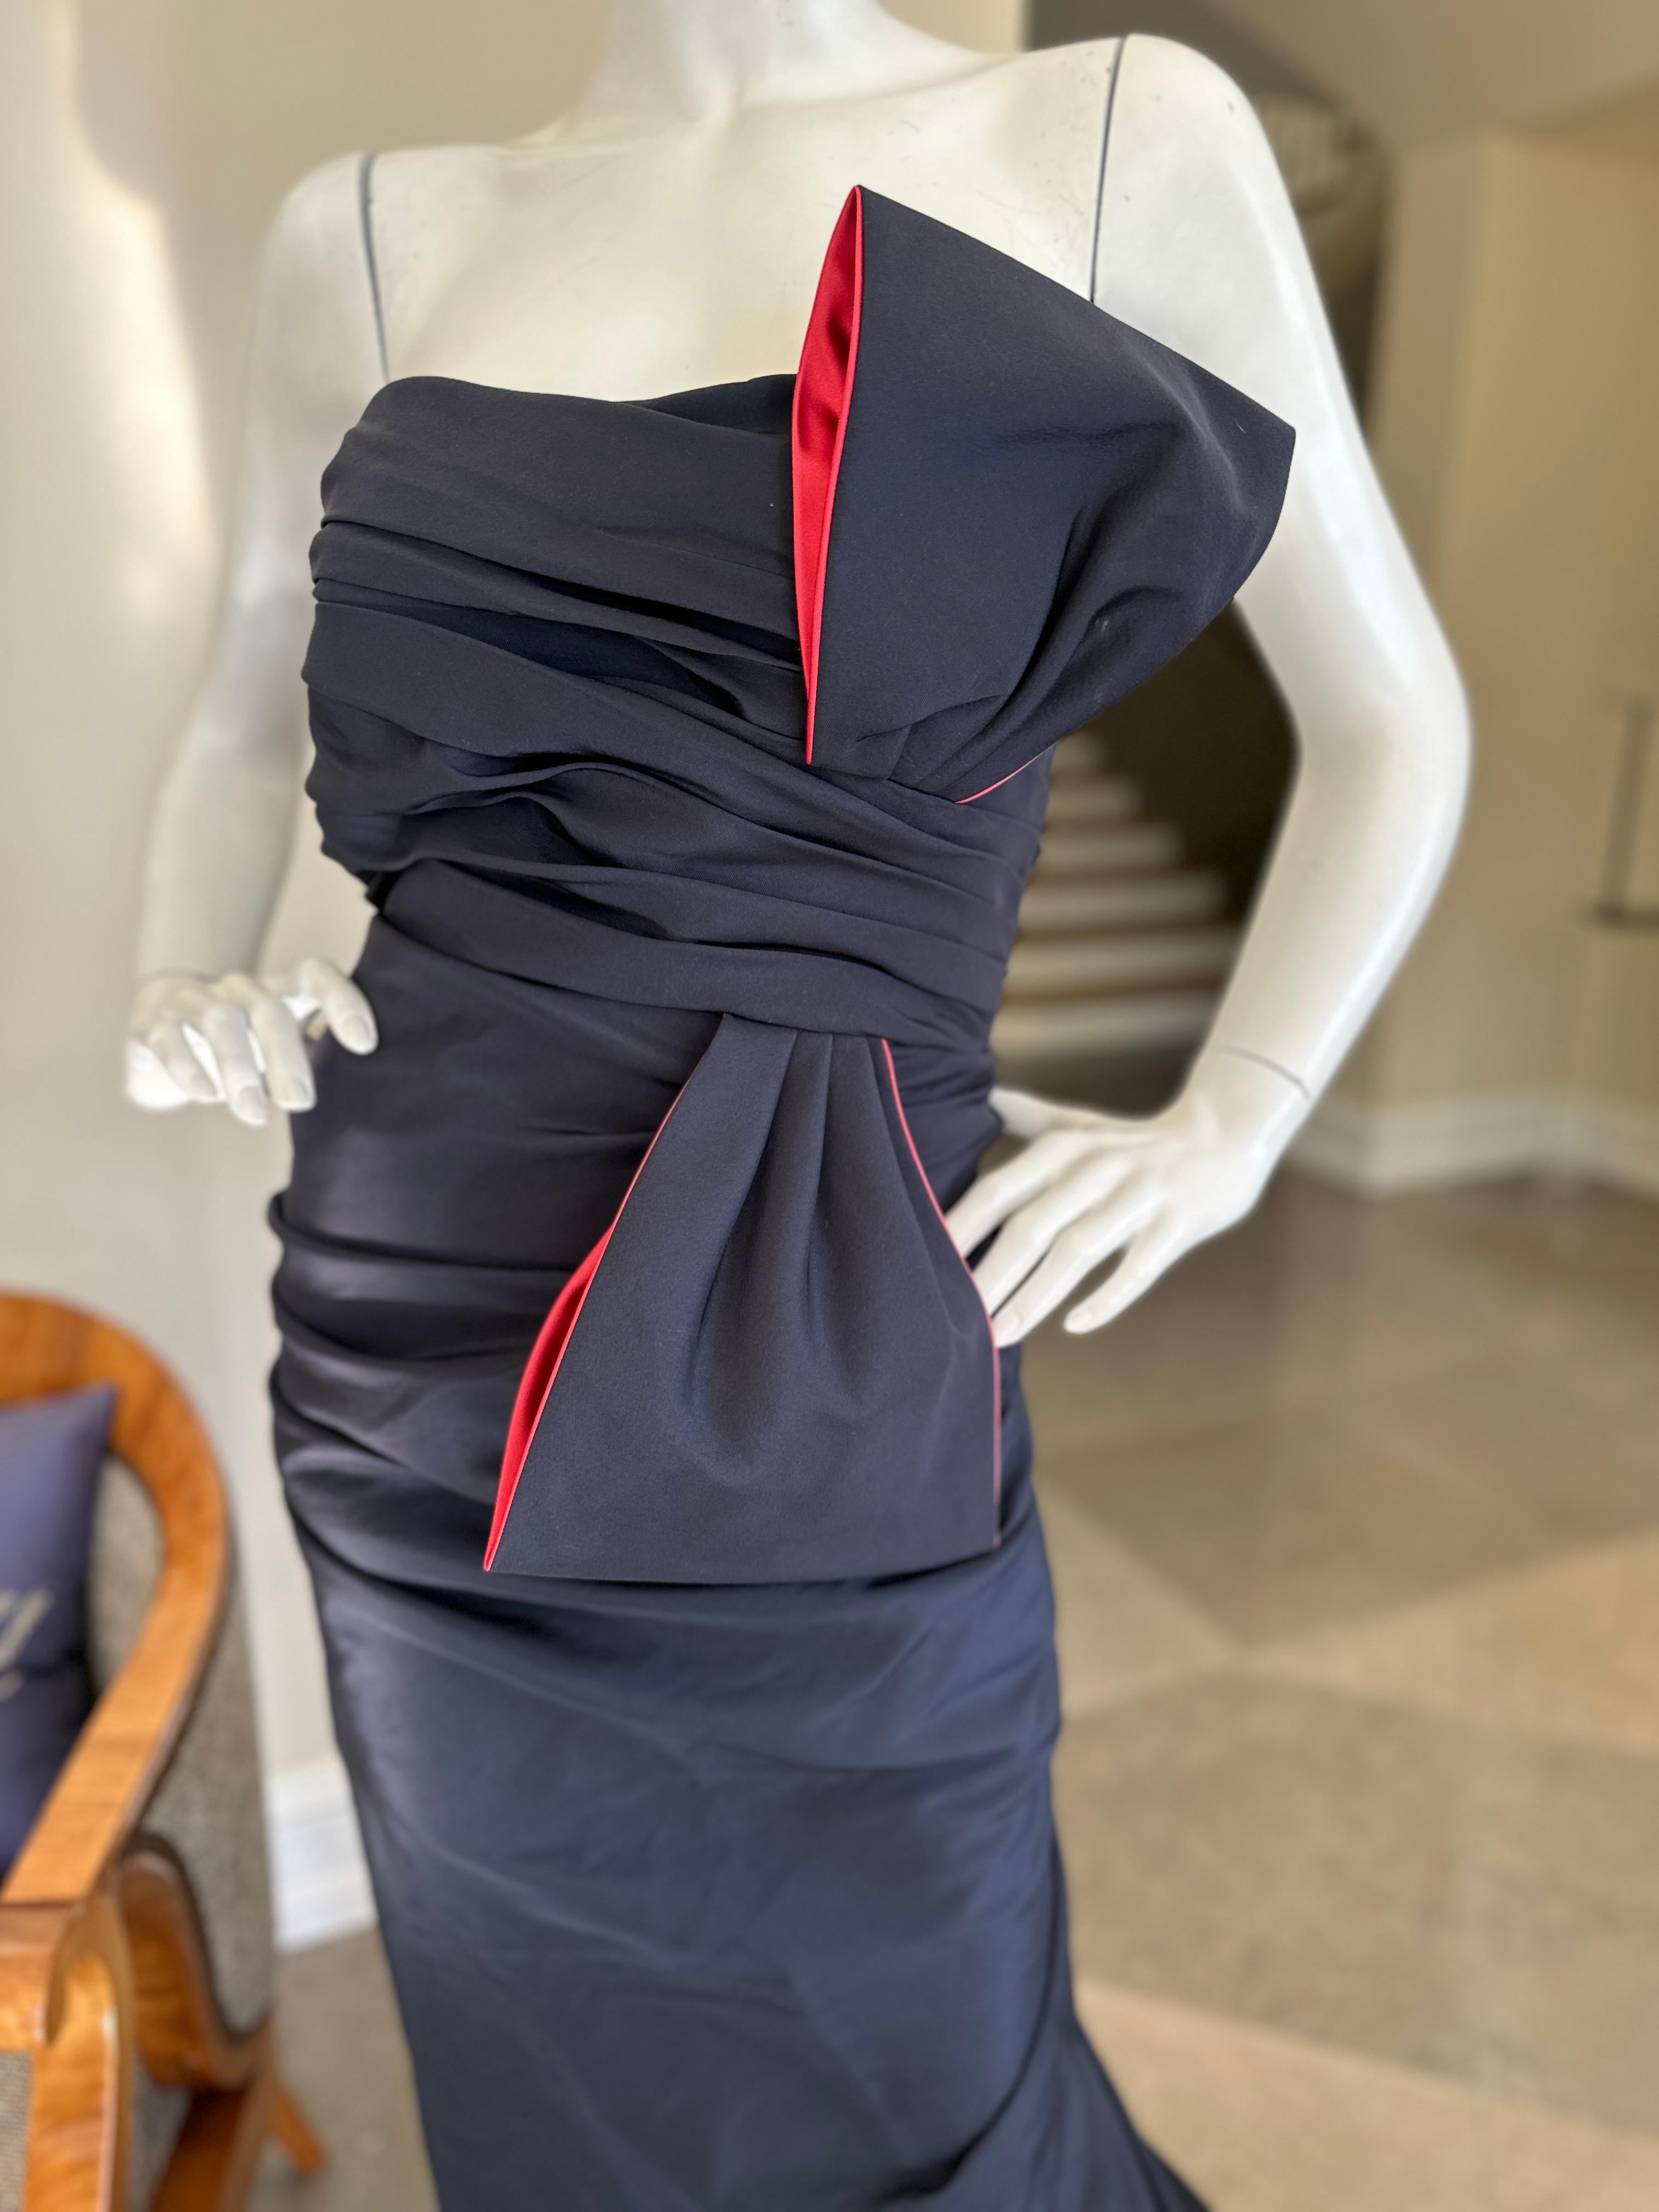  Roland Nivelais Strapless Vintage Silk Evening Dress with Exaggerated Bow & Fishtail Back 
Marked size 8 
Simply stunning, please use the zoom feature to see all the remarkable details.
Bust 36